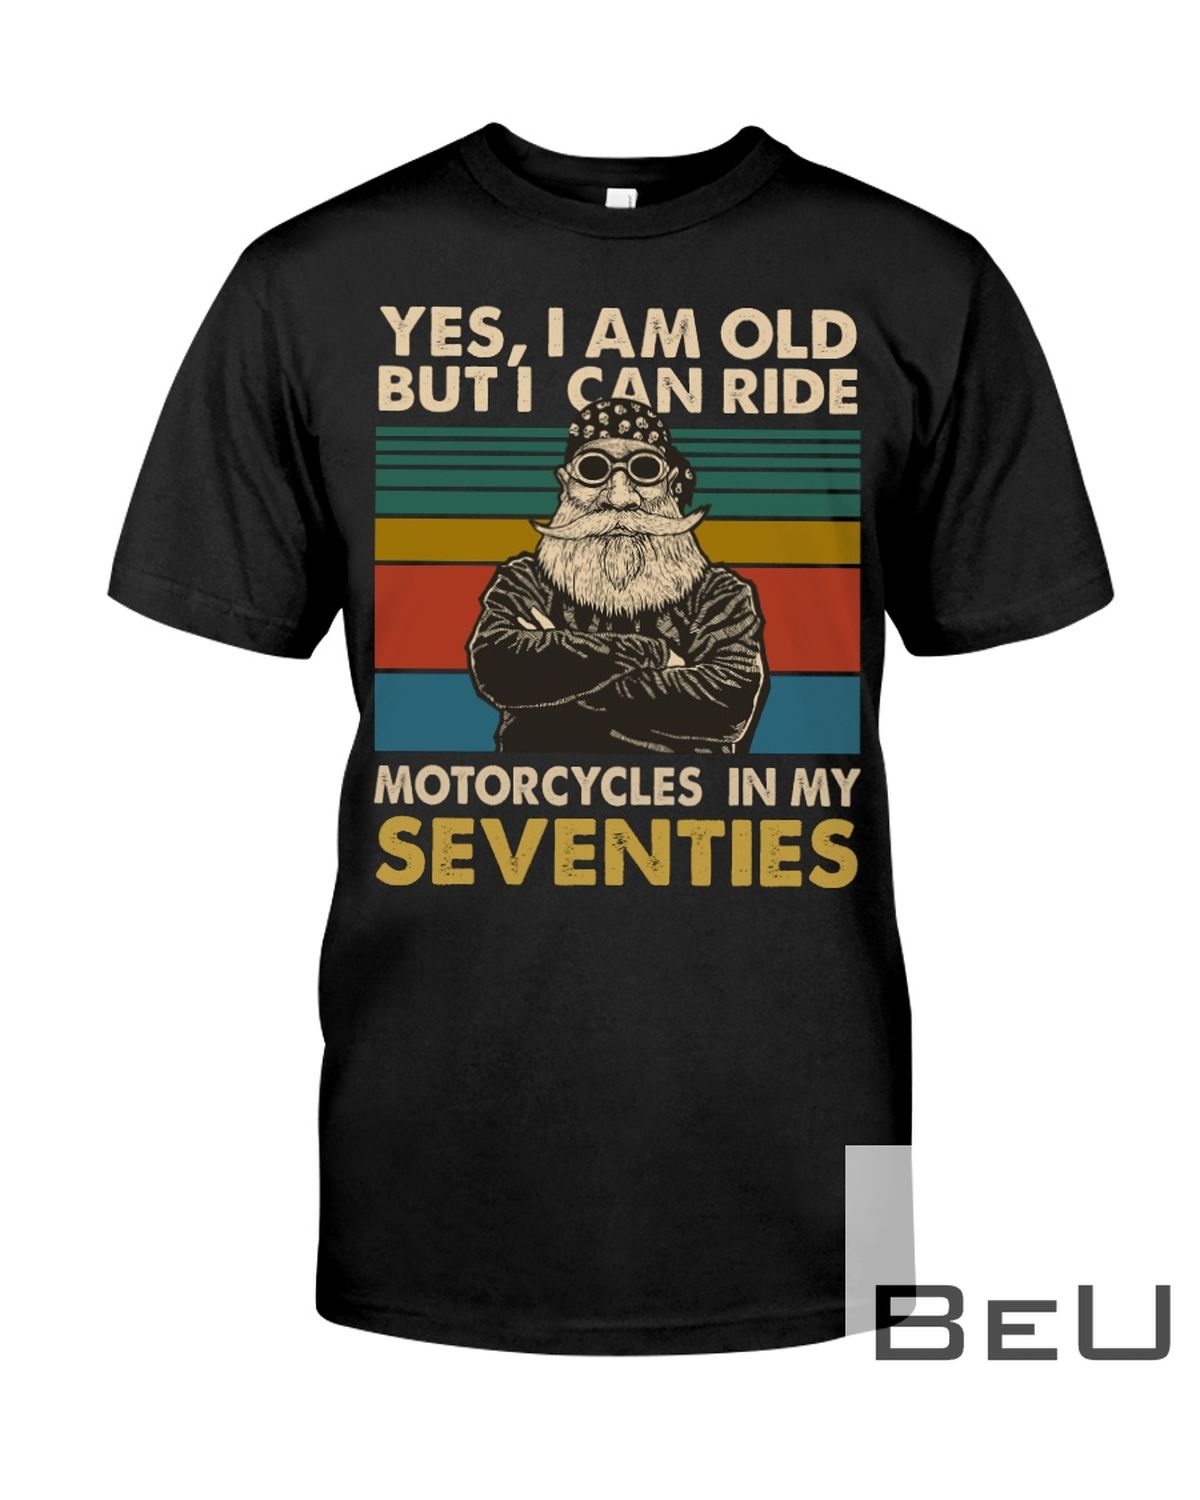 I Can Ride Motorcycles In My Seventies Shirt